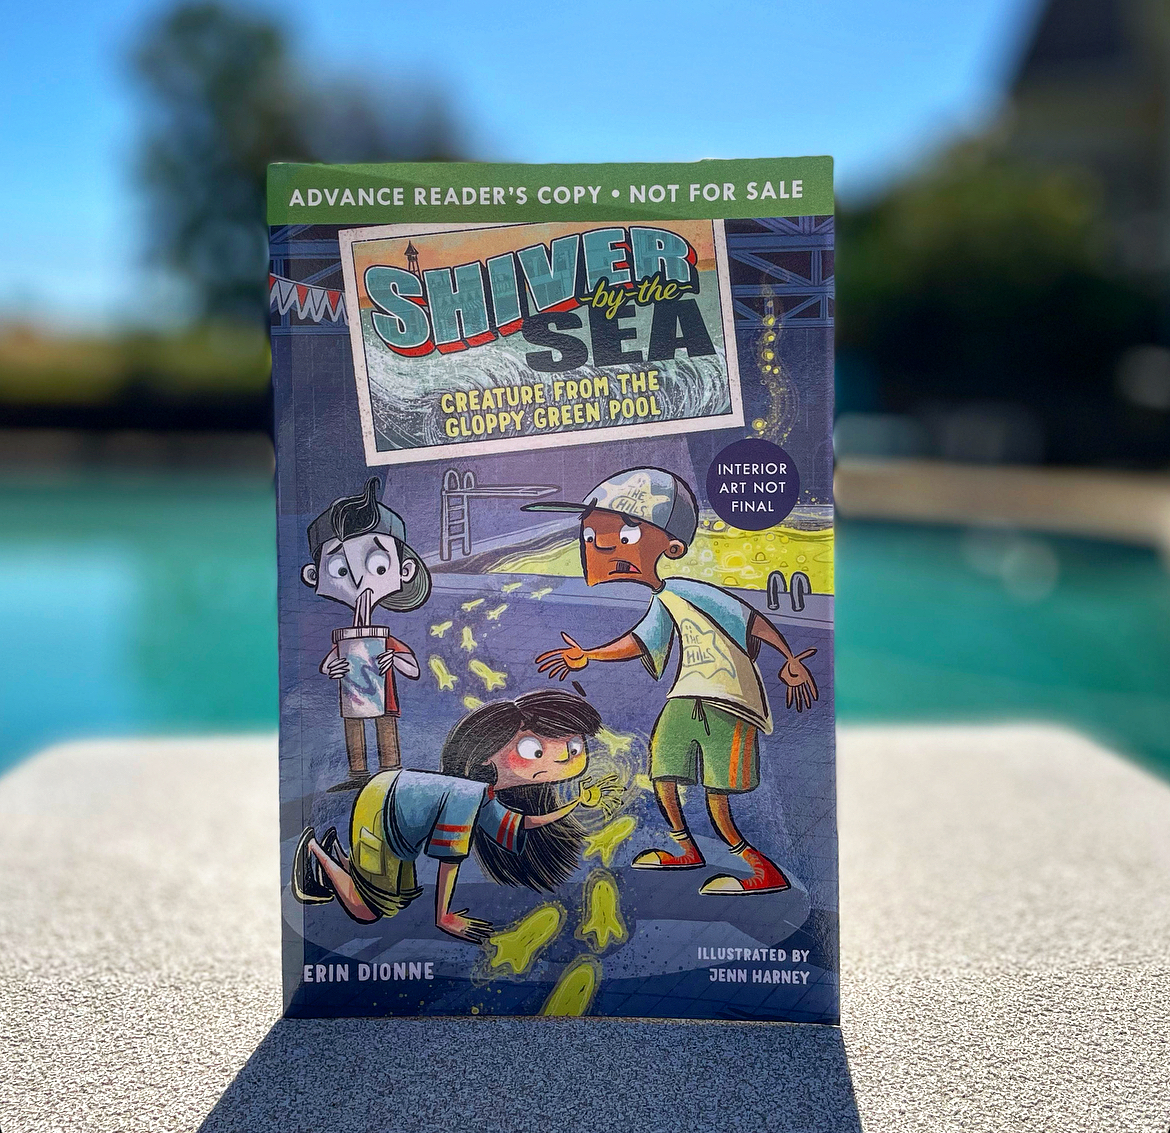 As the weather warms up, return to the town of Shiver-by-the-Sea with SHIVER-BY-THE-SEA: CREATURE FROM THE GLOOPY GREEN POOL! Out in one month! @erindionne ow.ly/NsGW50RpxuK